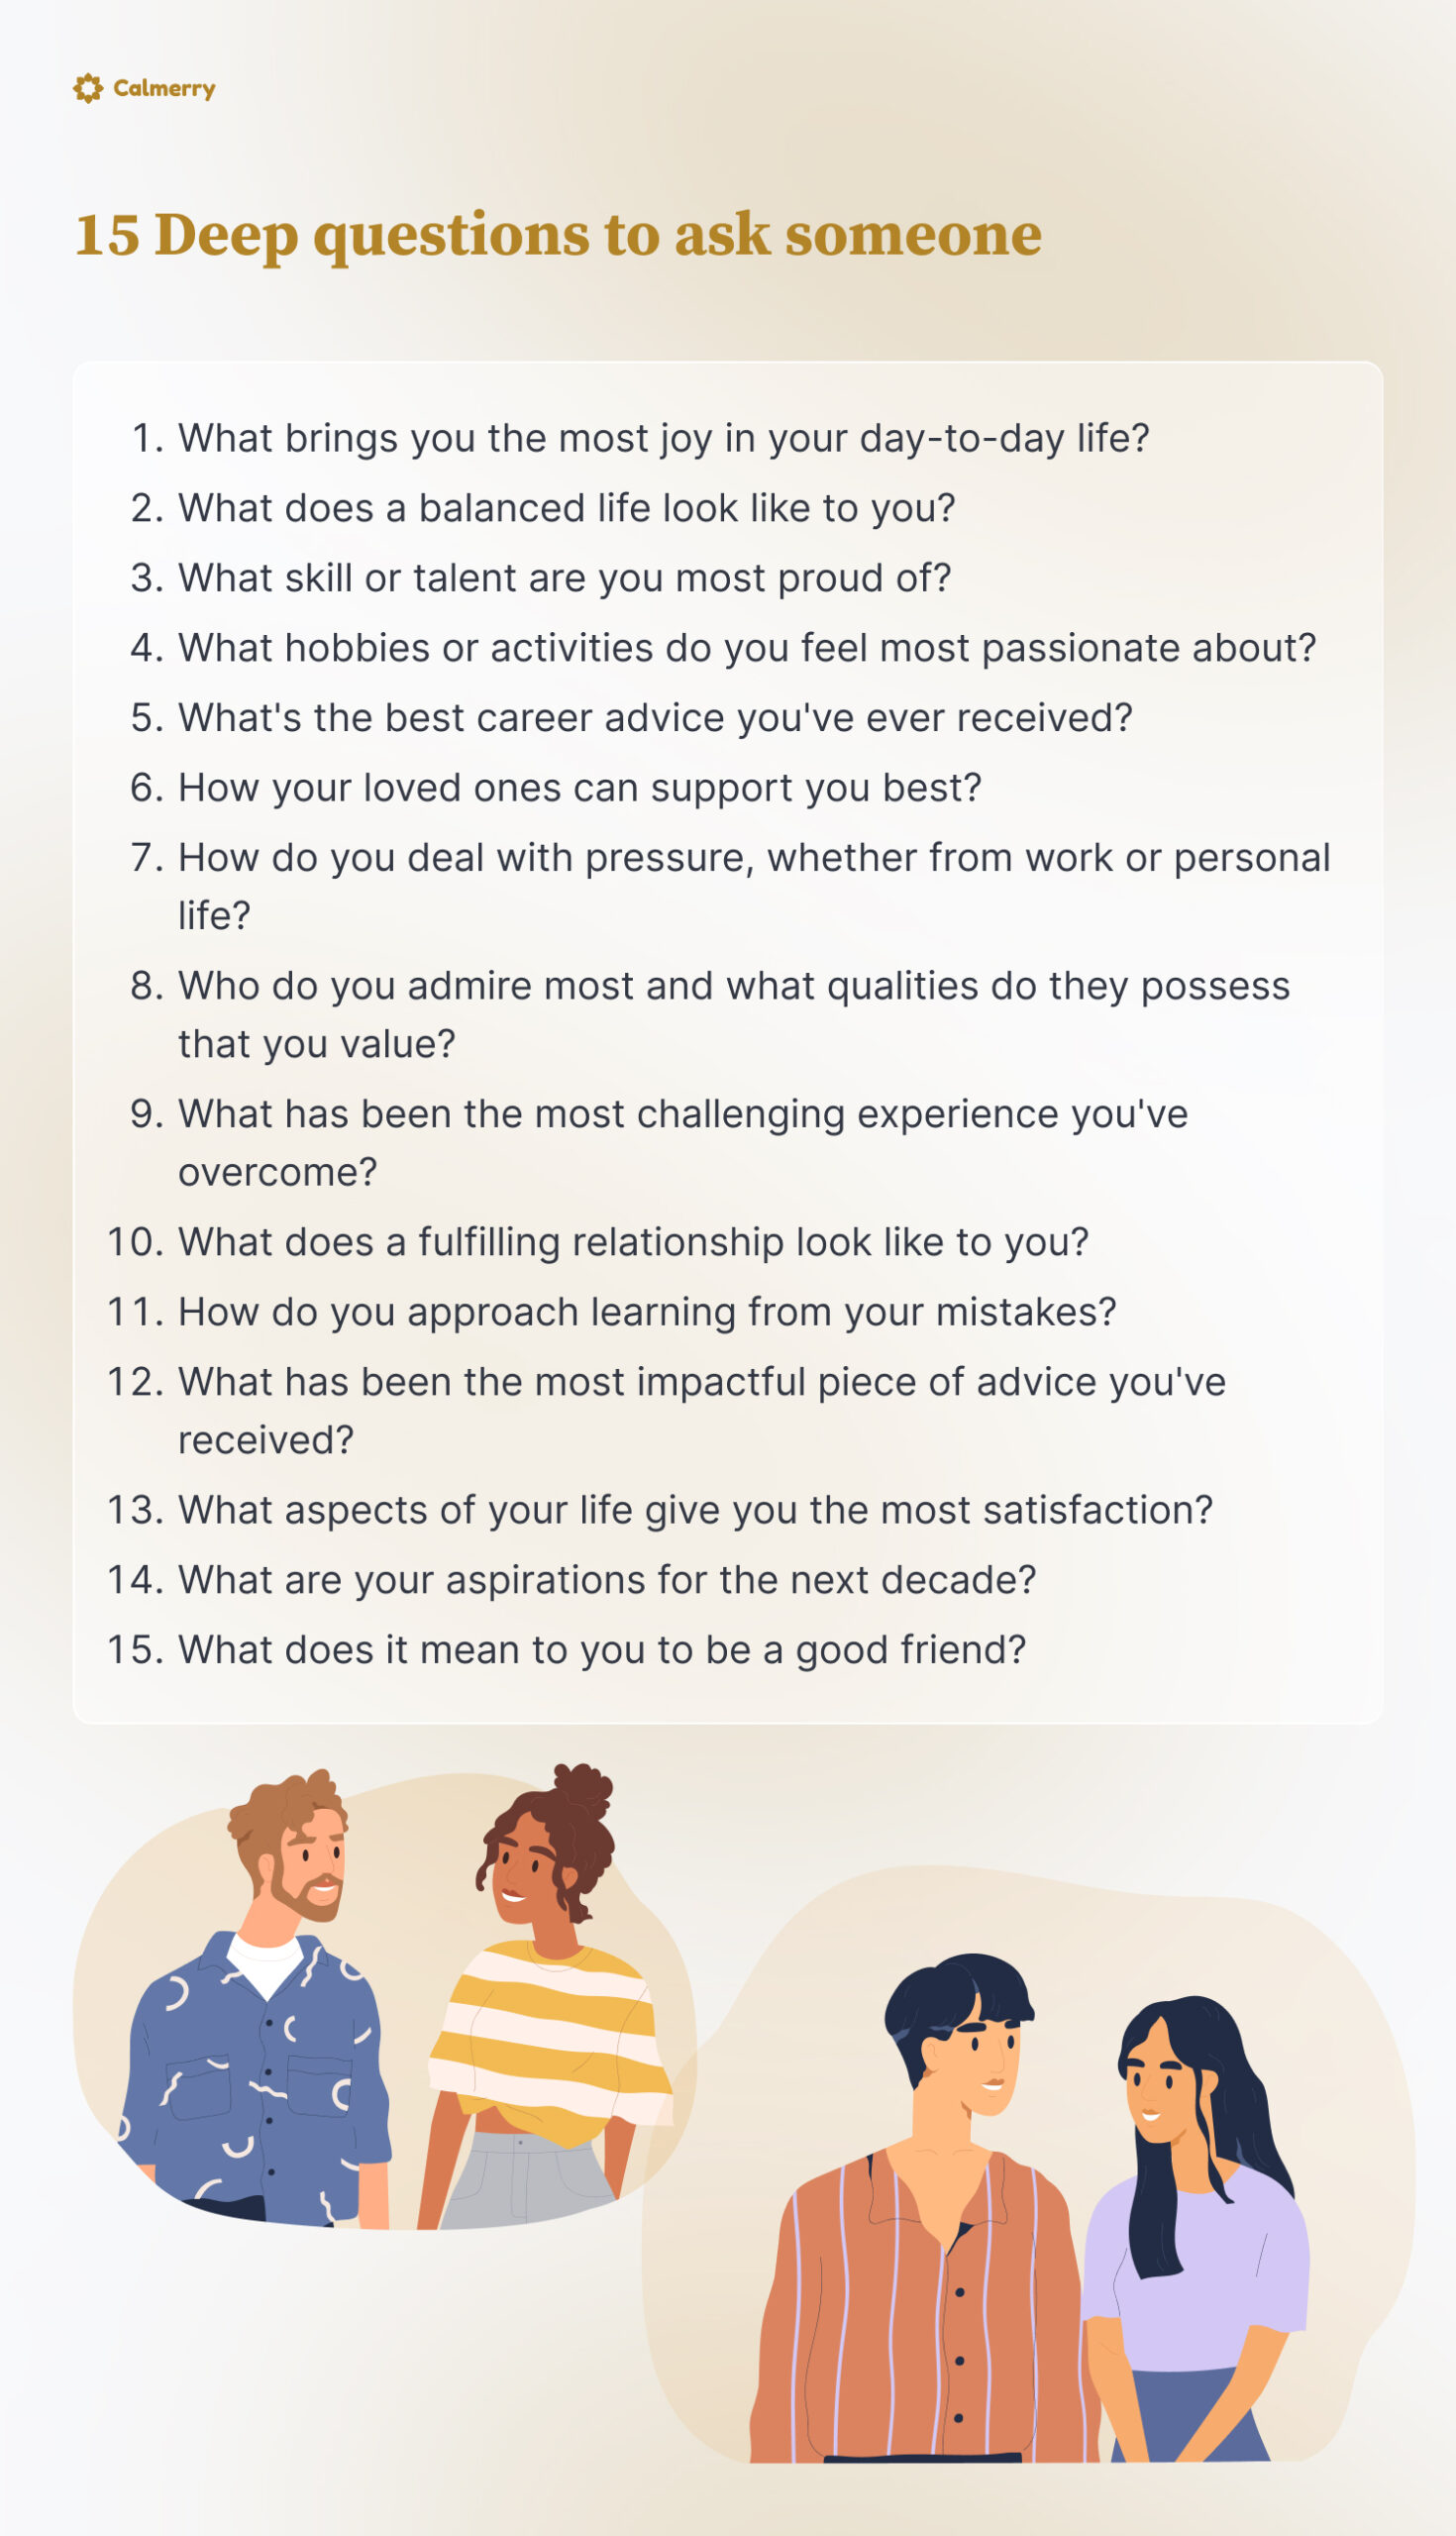 15 Deep questions to ask someone
What brings you the most joy in your day-to-day life?
What does a balanced life look like to you?
What skill or talent are you most proud of?
What hobbies or activities do you feel most passionate about?
What's the best career advice you've ever received?
How your loved ones can support you best?
How do you deal with pressure, whether from work or personal life?
Who do you admire most and what qualities do they possess that you value?
What has been the most challenging experience you've overcome?
What does a fulfilling relationship look like to you?
How do you approach learning from your mistakes?
What has been the most impactful piece of advice you've received?
What aspects of your life give you the most satisfaction?
What are your aspirations for the next decade?
What does it mean to you to be a good friend?
